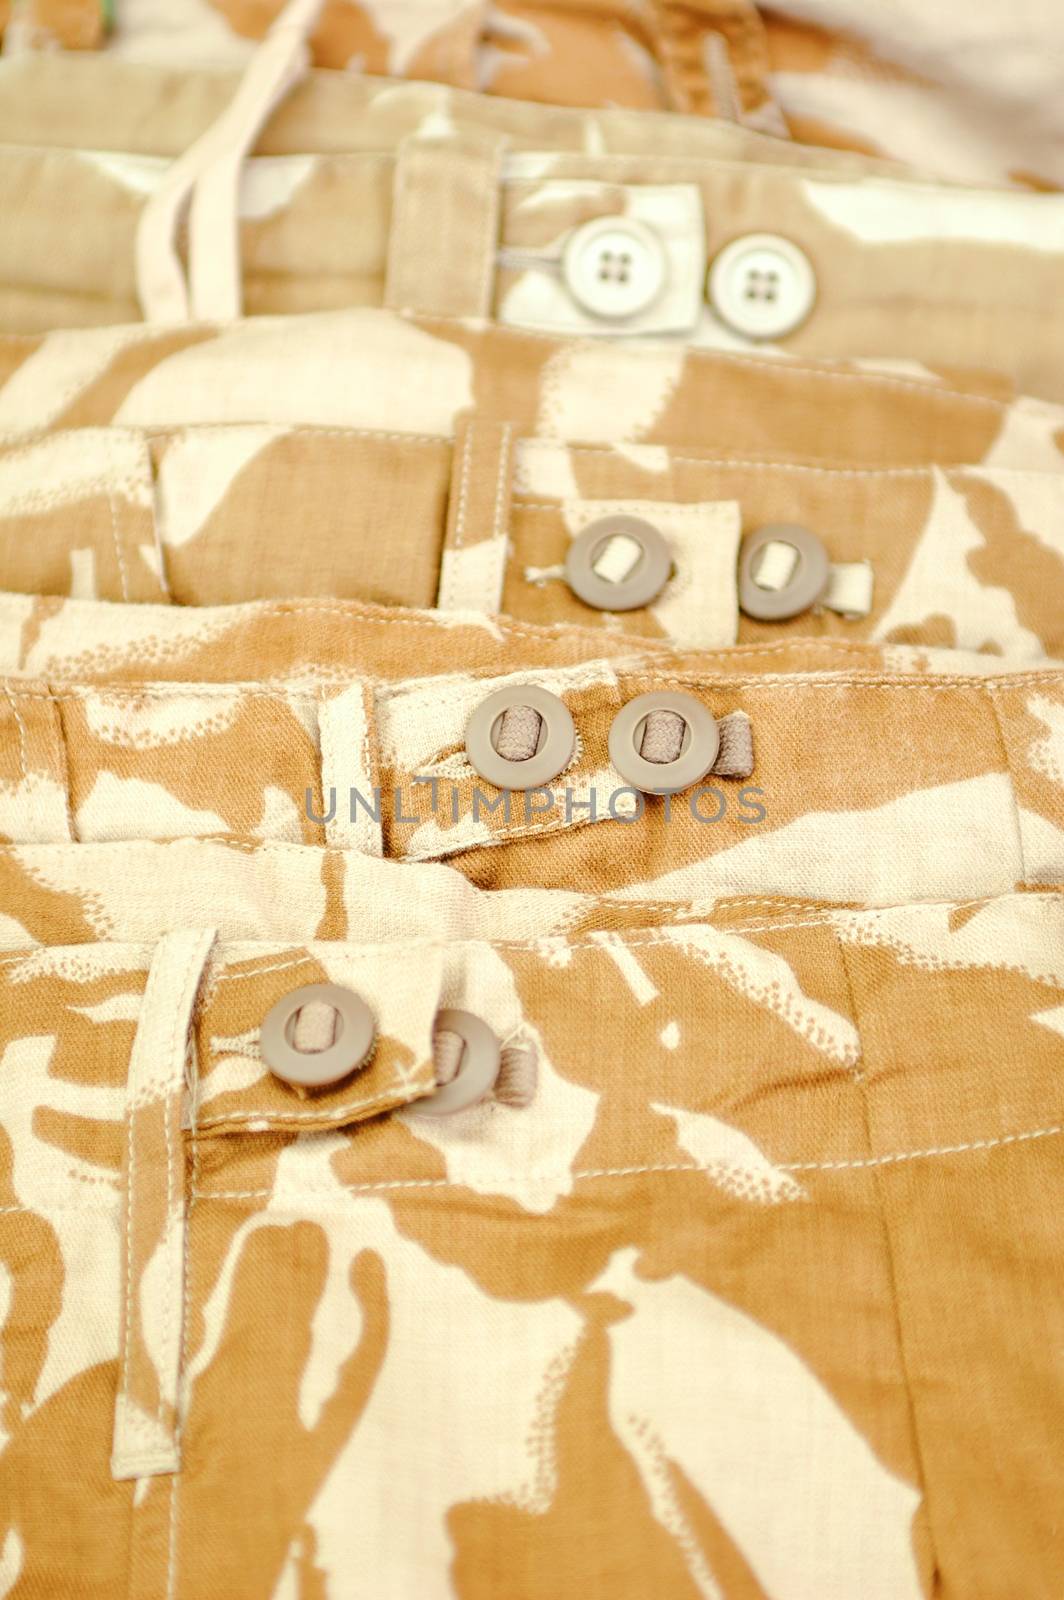 beige colored military desert camouflage clothing